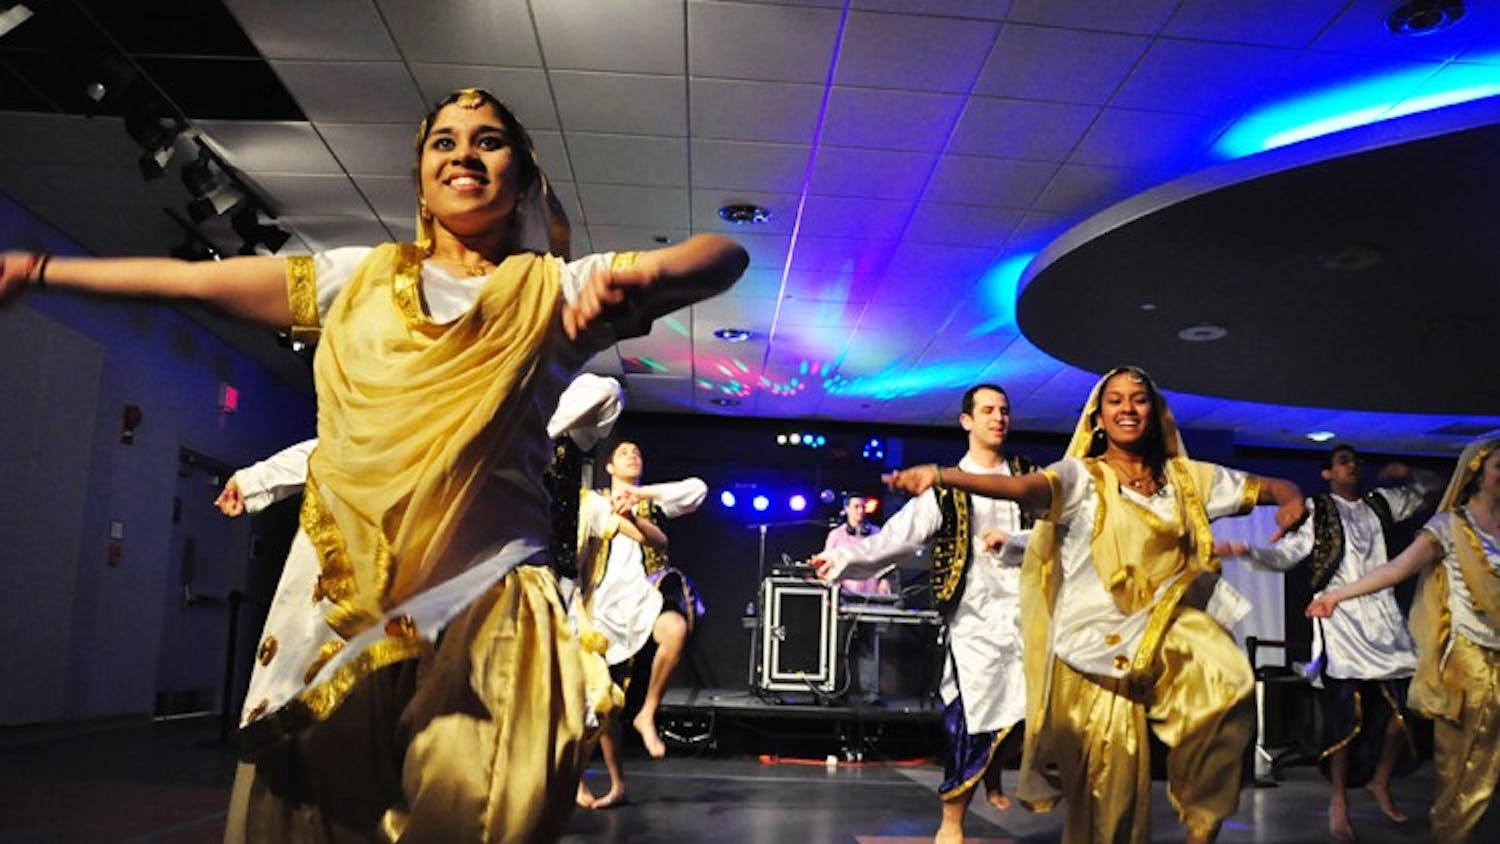 DANCING THE NIGHT AWAY â€“ AUâ€™s bhanga team performs as part of the Stay-Awake-a-Thon on March 25. More than 100 students attended the event, raising more than $2,000 for charity.